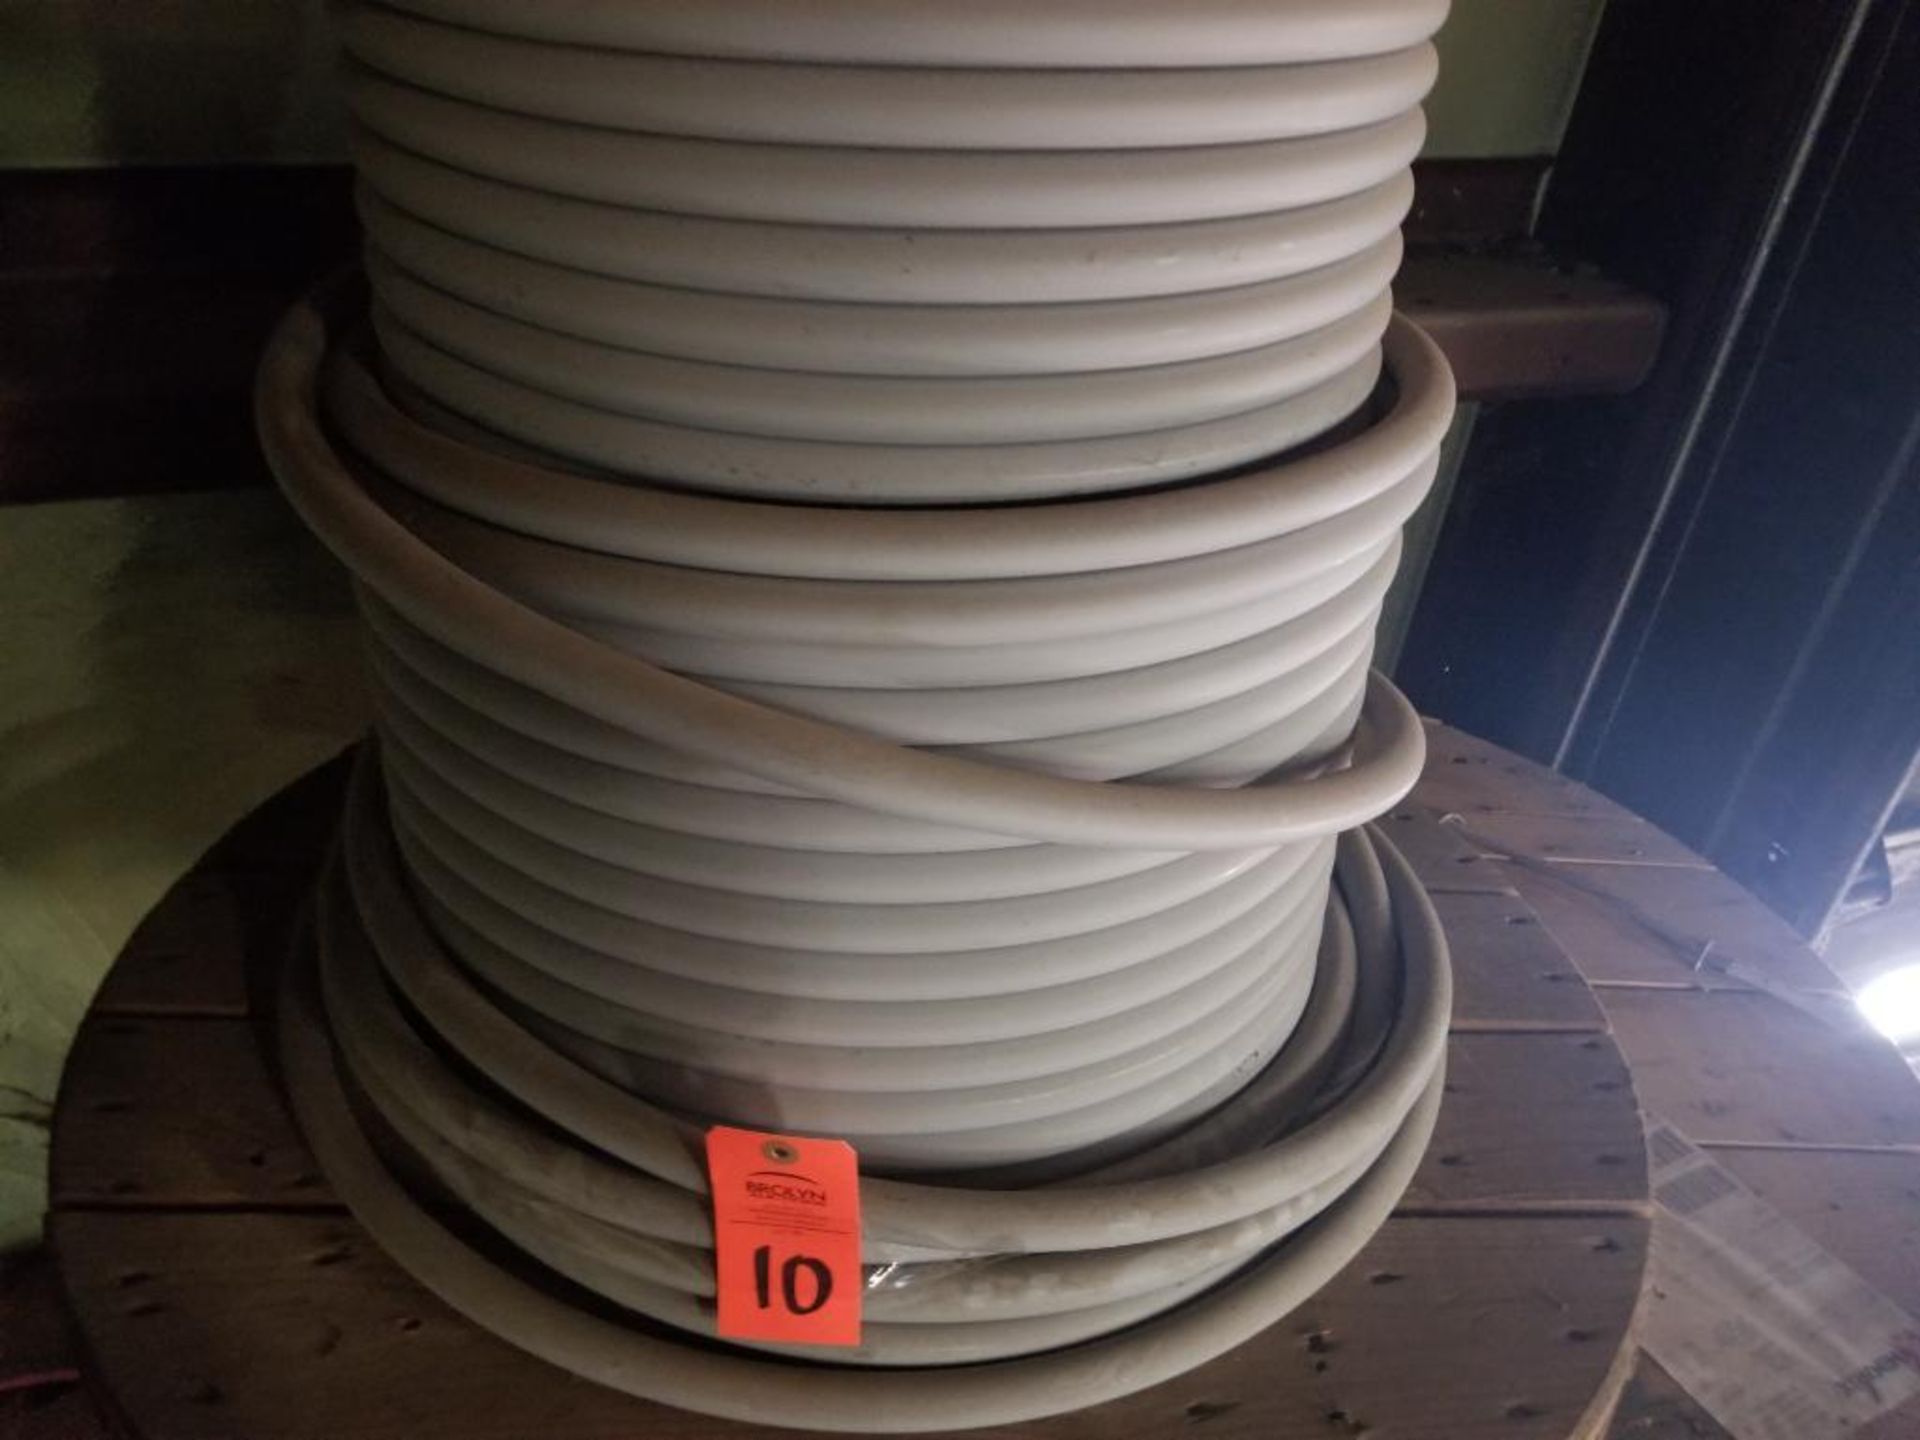 Spool of 15kV Hendrick spacer cable system wire 336, AAC-19X-PACT-15kV-75-3lyr. - Image 3 of 3